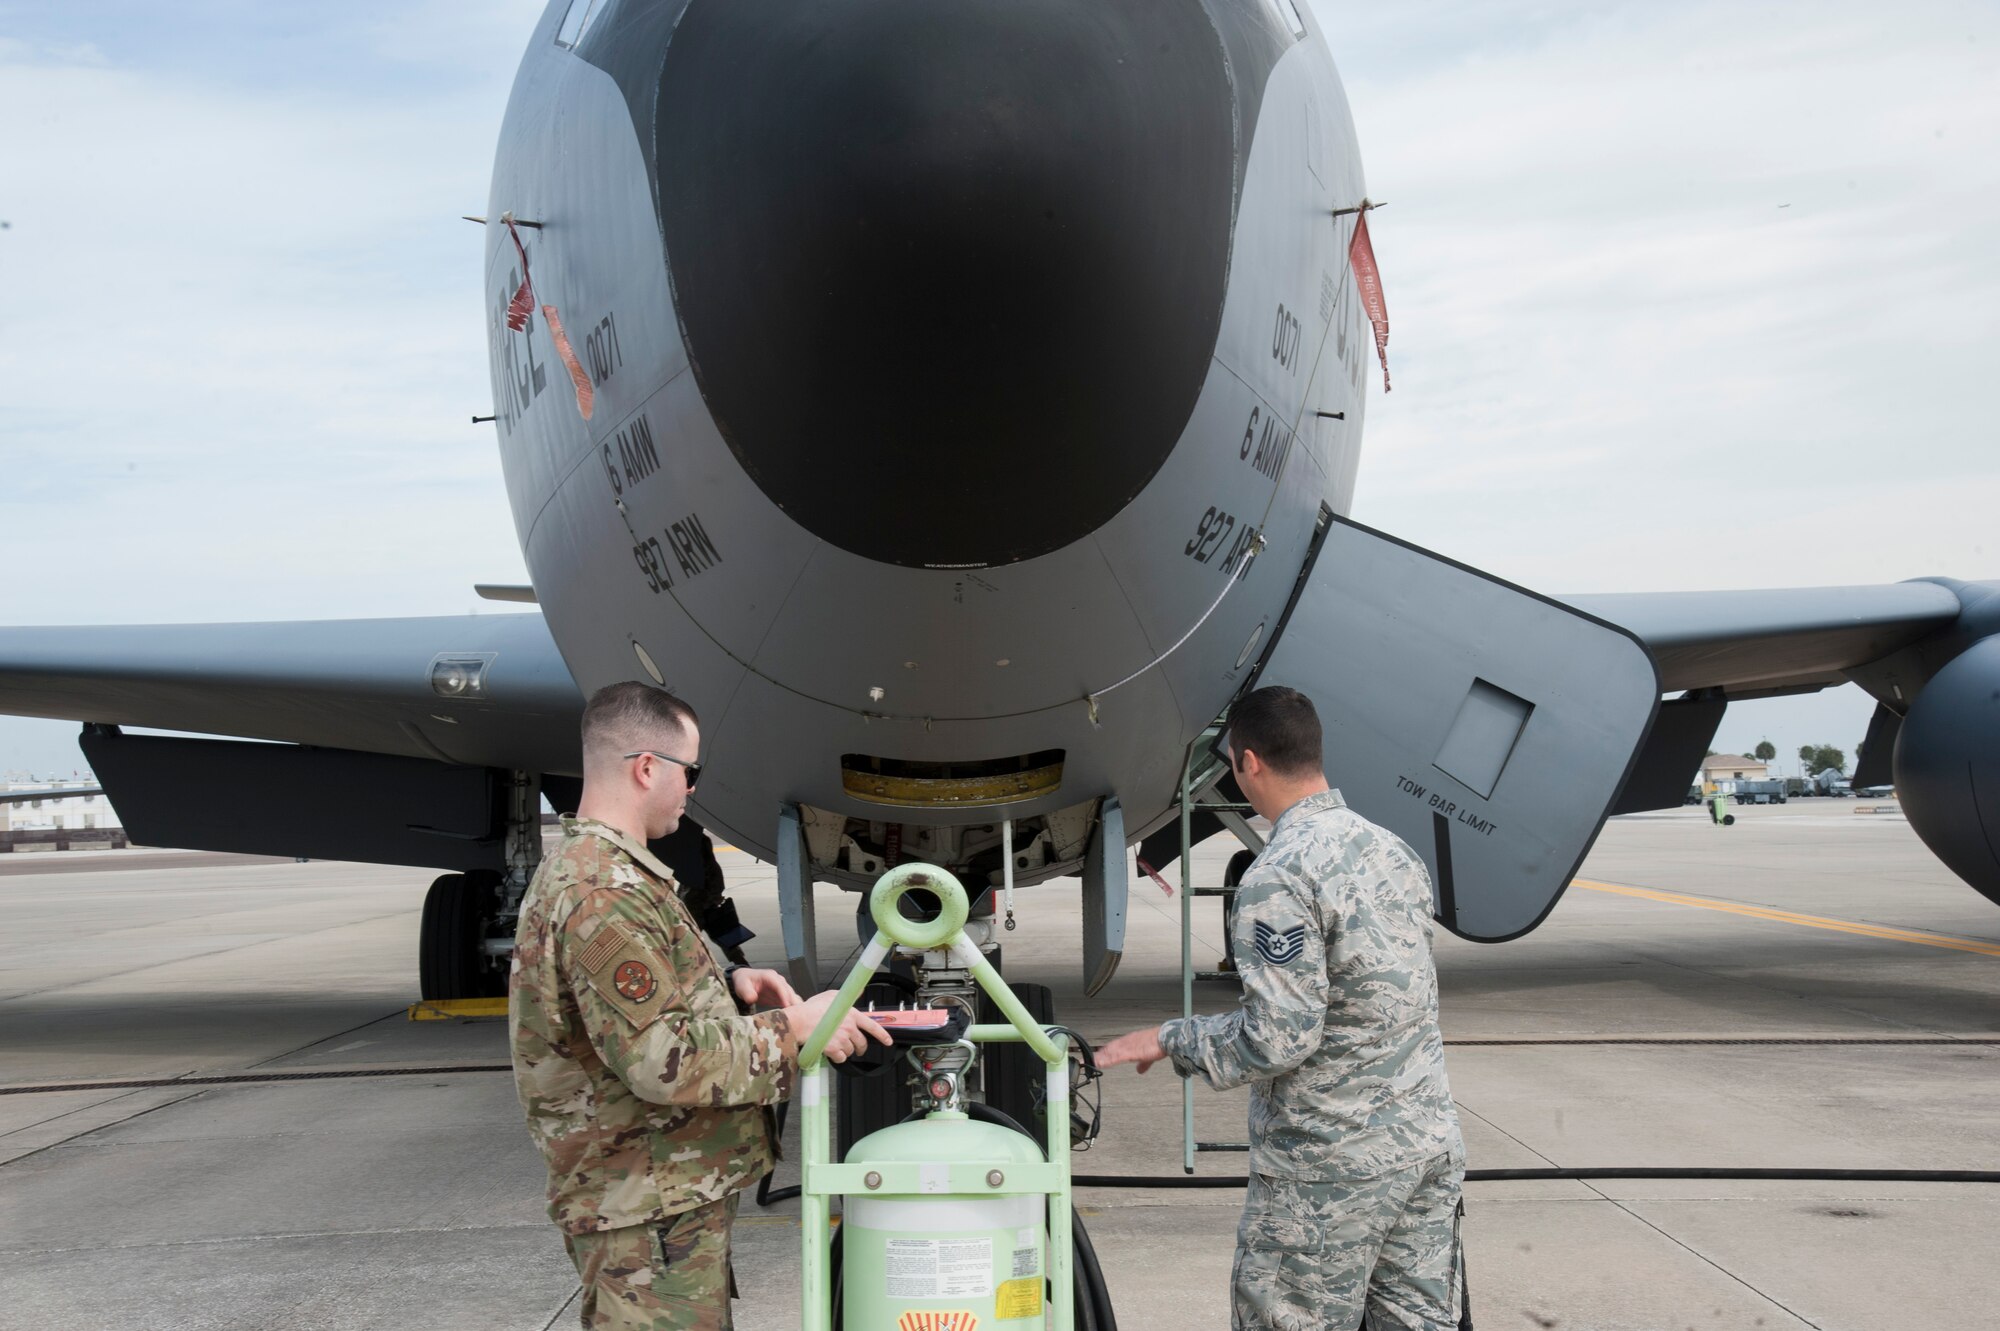 U.S. Air Force Staff Sgt. Robert Argenti (left), a 6th Aircraft Maintenance Squadron (AMXS) instrument and flight control systems craftsman, and Tech. Sgt. Wesley May (right), a 6th AMXS aerospace propulsion specialist, look over a KC-135 maintenance checklist, Jan. 23, 2020, at MacDill Air Force Base, Fla.  The 6th AMXS provides on-equipment maintenance including launch, recovery, servicing and repair of KC-135 Stratotankers.